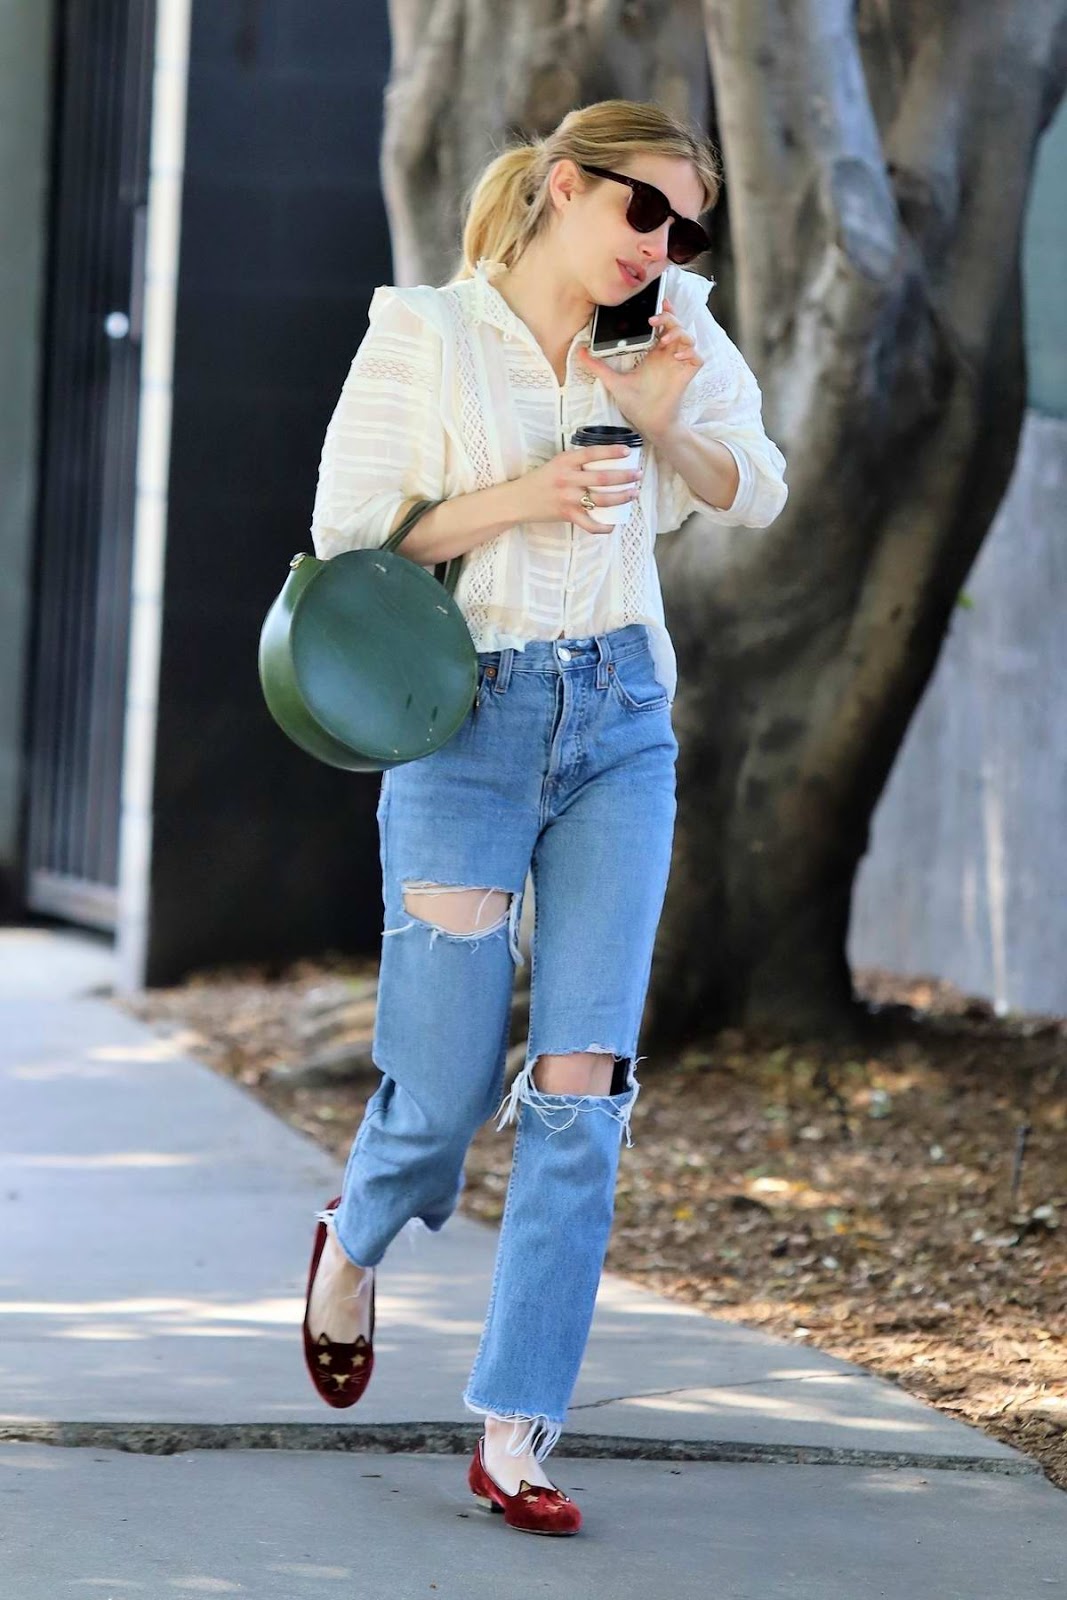 Emma Roberts – Celebrity Street Style in a Ripped Jeans in California